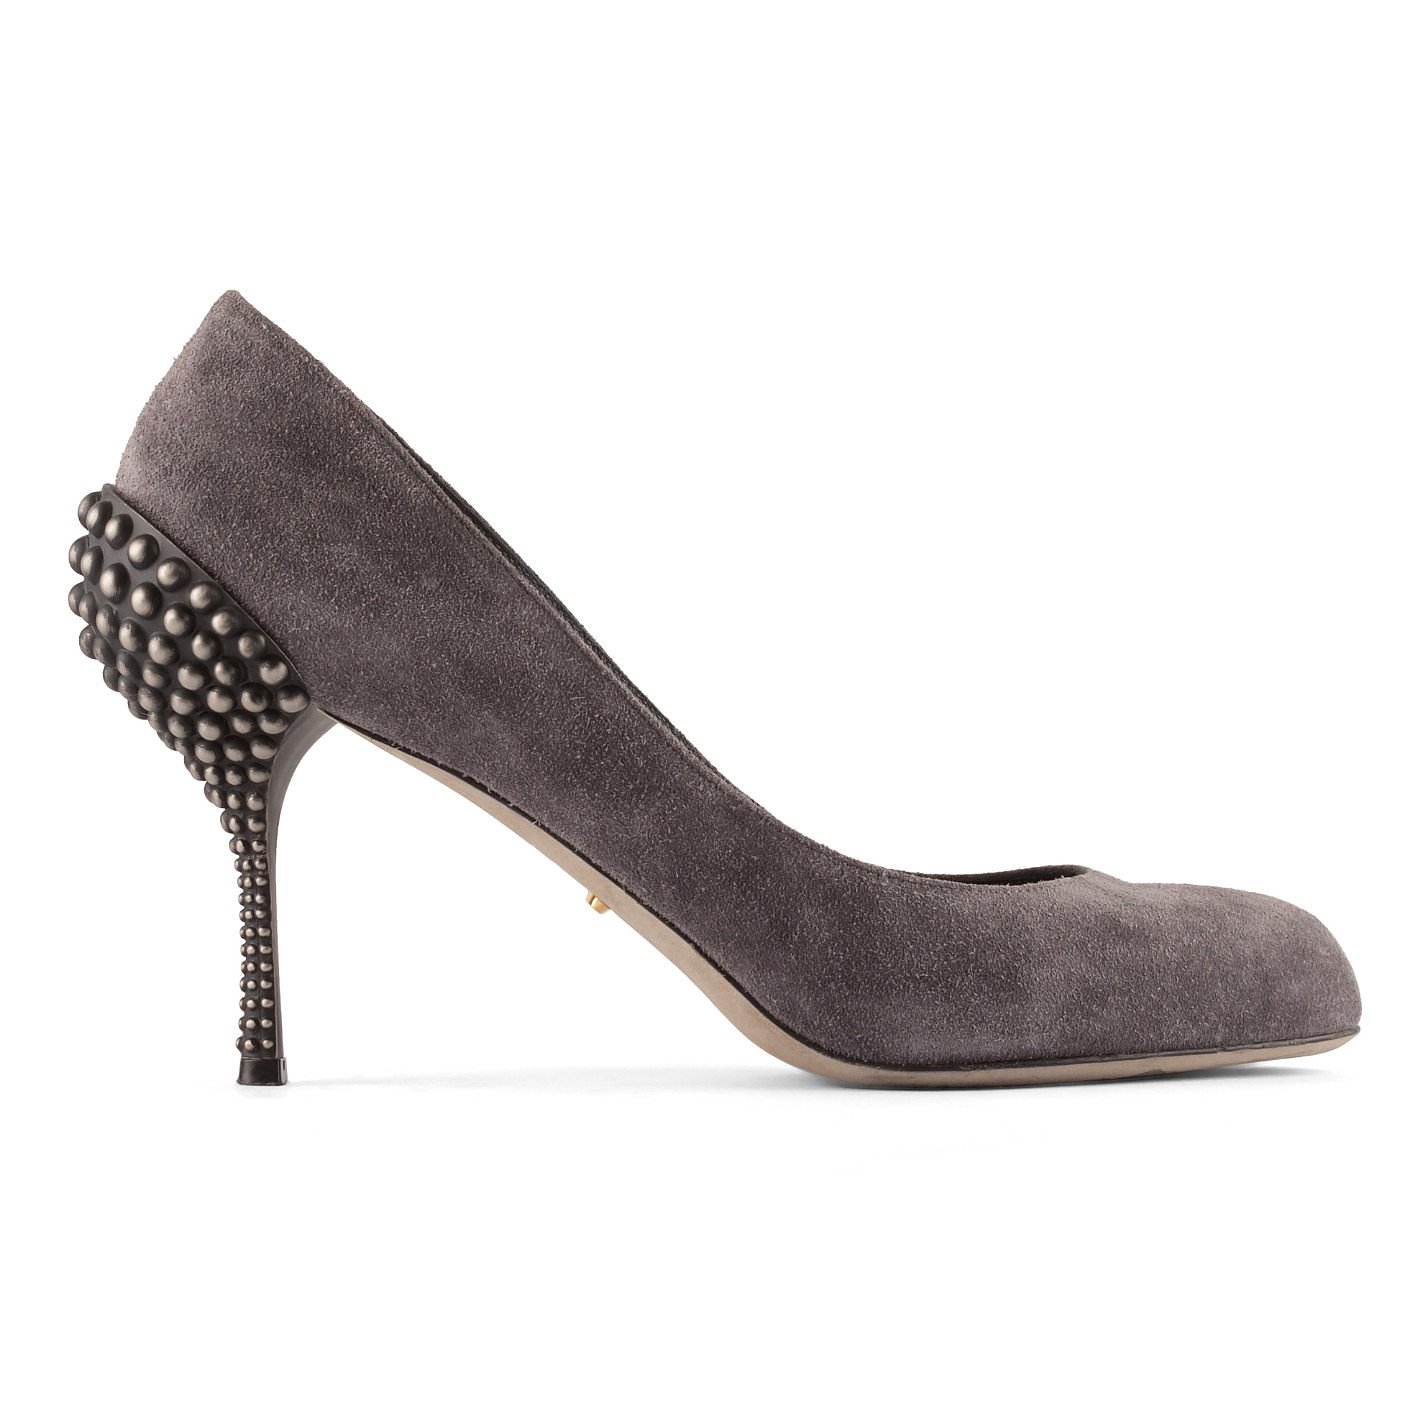 Sergio Rossi Suede Studded Pumps